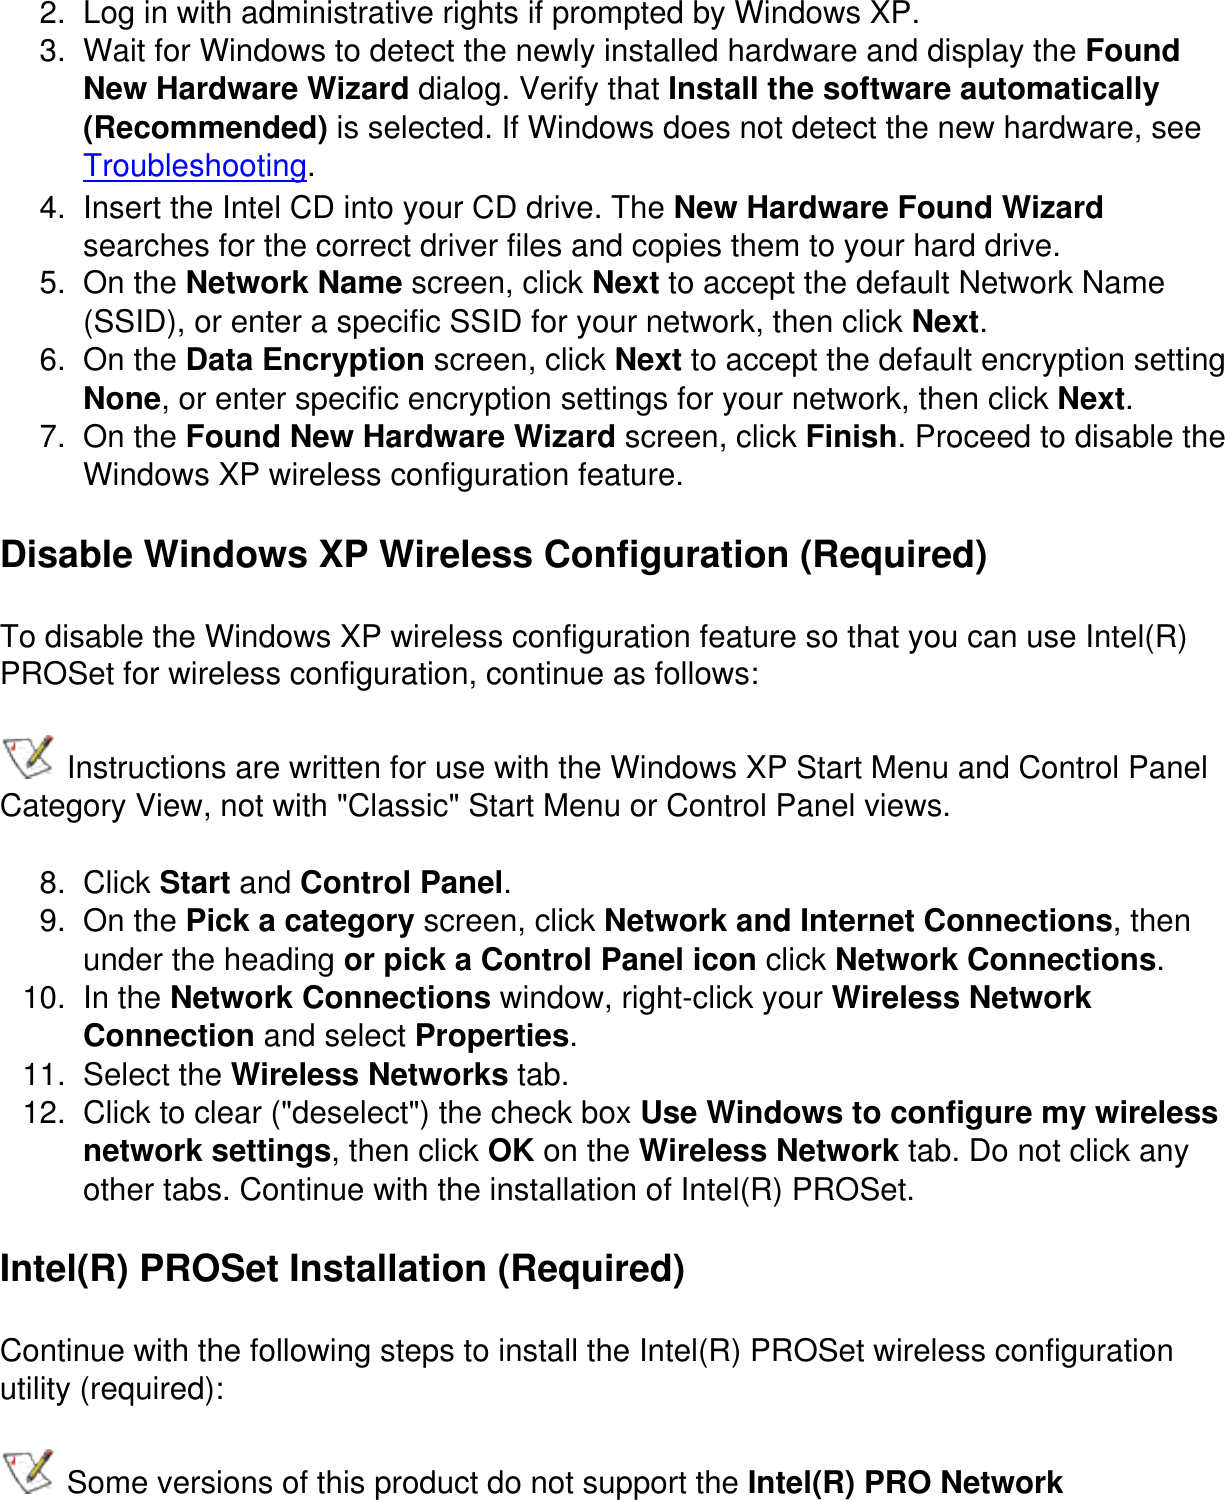 2.  Log in with administrative rights if prompted by Windows XP.3.  Wait for Windows to detect the newly installed hardware and display the Found New Hardware Wizard dialog. Verify that Install the software automatically (Recommended) is selected. If Windows does not detect the new hardware, see Troubleshooting.4.  Insert the Intel CD into your CD drive. The New Hardware Found Wizard searches for the correct driver files and copies them to your hard drive.5.  On the Network Name screen, click Next to accept the default Network Name (SSID), or enter a specific SSID for your network, then click Next.6.  On the Data Encryption screen, click Next to accept the default encryption setting None, or enter specific encryption settings for your network, then click Next.7.  On the Found New Hardware Wizard screen, click Finish. Proceed to disable the Windows XP wireless configuration feature.Disable Windows XP Wireless Configuration (Required)To disable the Windows XP wireless configuration feature so that you can use Intel(R) PROSet for wireless configuration, continue as follows: Instructions are written for use with the Windows XP Start Menu and Control Panel Category View, not with &quot;Classic&quot; Start Menu or Control Panel views.8.  Click Start and Control Panel.9.  On the Pick a category screen, click Network and Internet Connections, then under the heading or pick a Control Panel icon click Network Connections.10.  In the Network Connections window, right-click your Wireless Network Connection and select Properties.11.  Select the Wireless Networks tab.12.  Click to clear (&quot;deselect&quot;) the check box Use Windows to configure my wireless network settings, then click OK on the Wireless Network tab. Do not click any other tabs. Continue with the installation of Intel(R) PROSet.Intel(R) PROSet Installation (Required)Continue with the following steps to install the Intel(R) PROSet wireless configuration utility (required): Some versions of this product do not support the Intel(R) PRO Network 